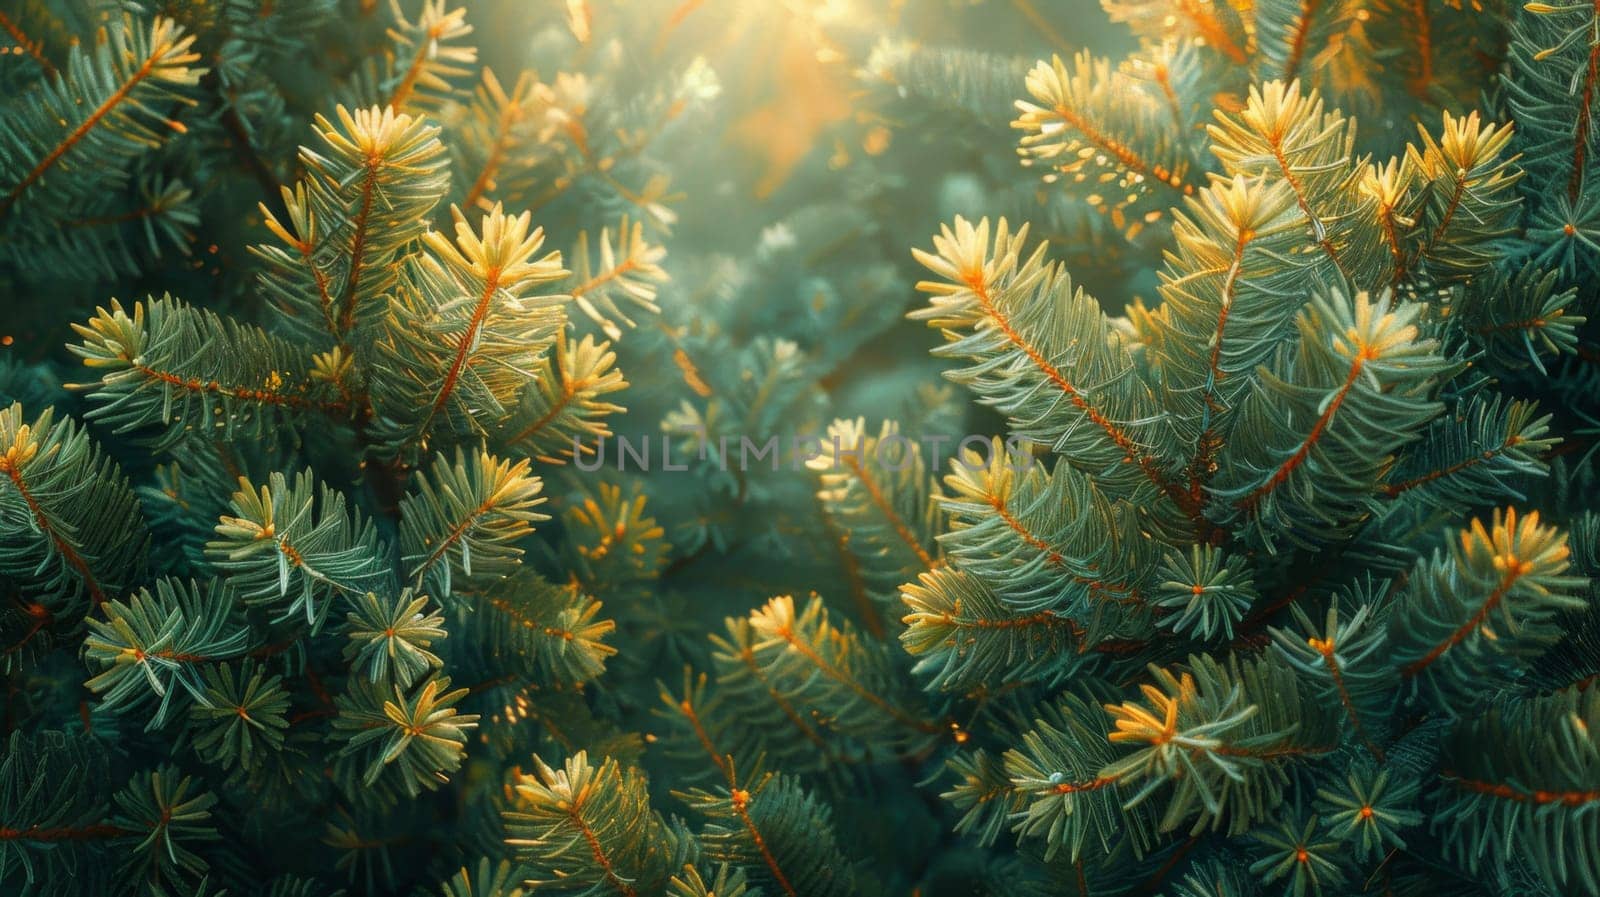 Close-up of spruce branches. Background of spruce branches.